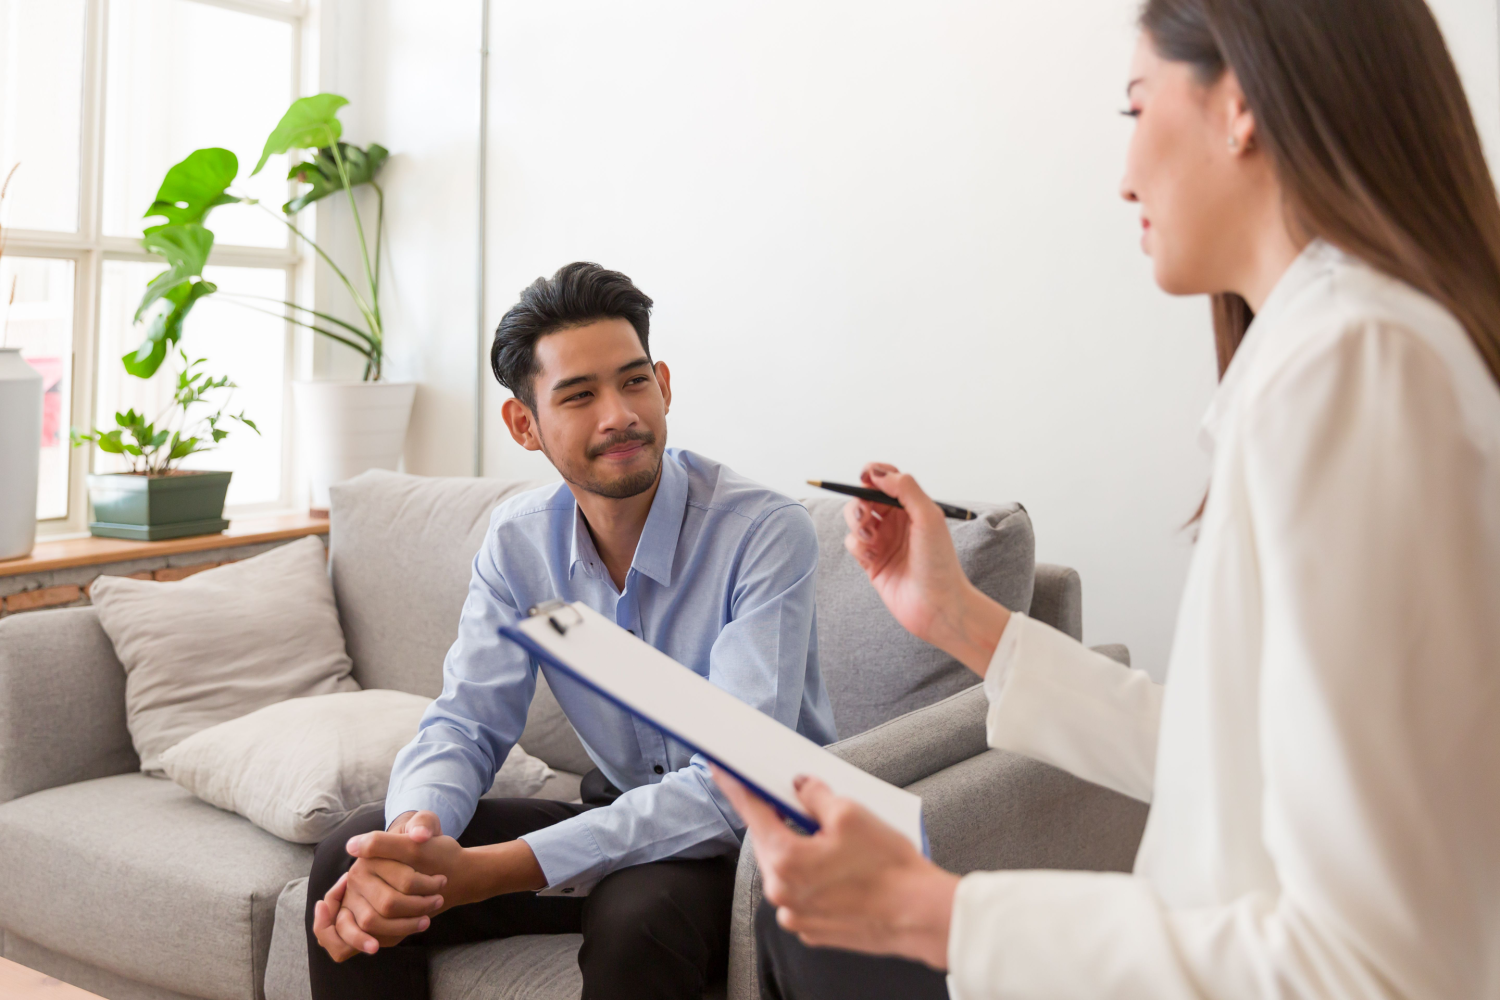 What Is Dialectical Behavior Therapy (DBT)?